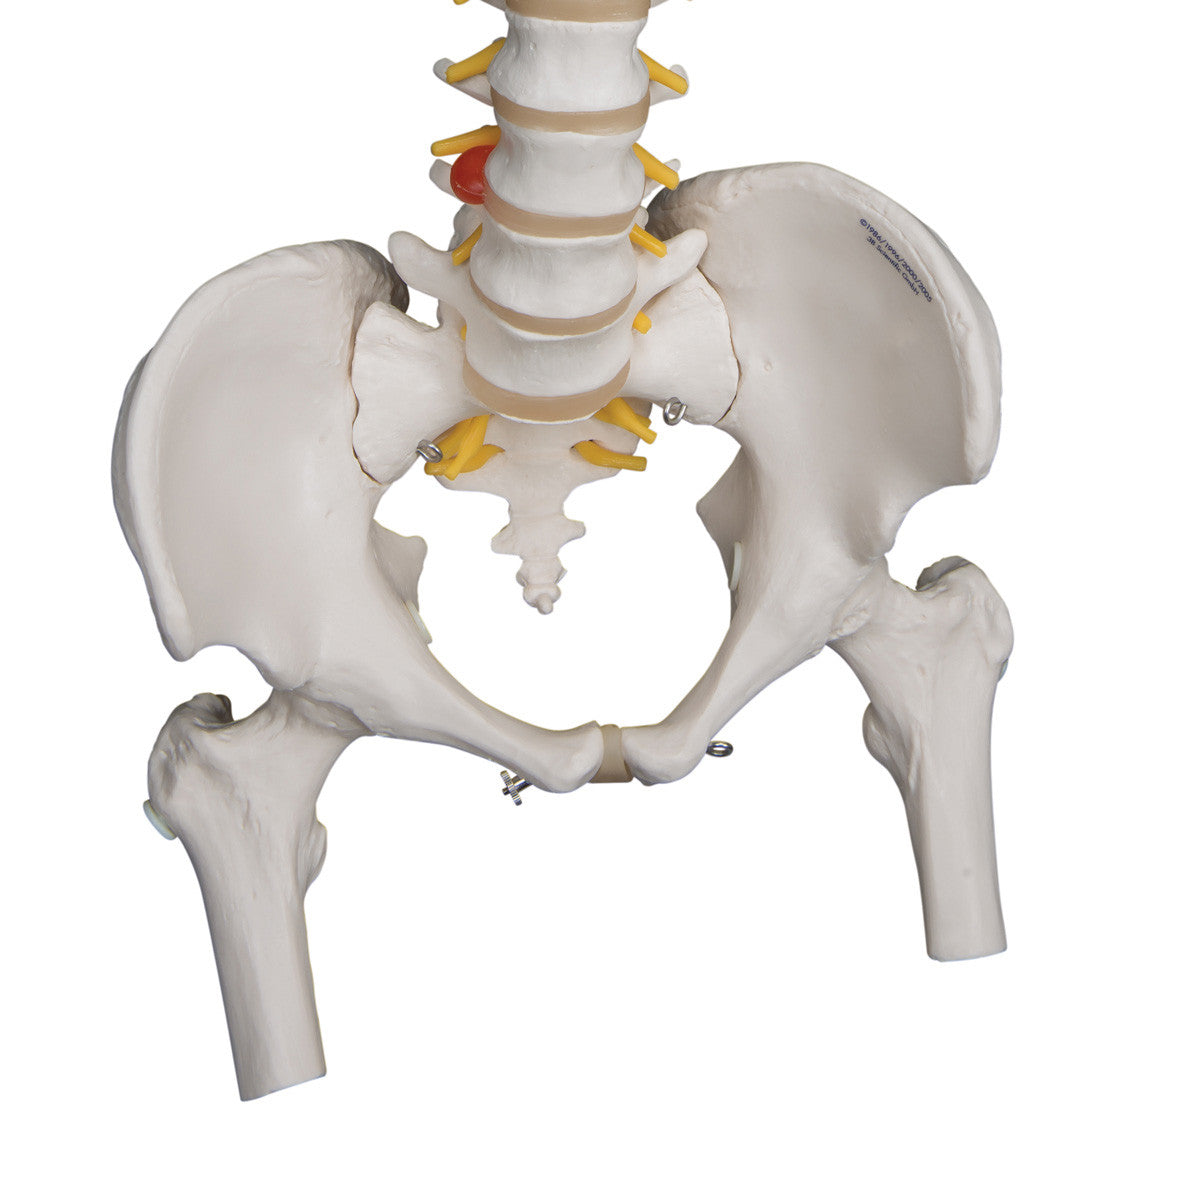 a59-2_05_1200_1200_highly-flexible-human-spine-model-mounted-on-a-flexible-core-with-femur-heads-3b-smart-anatomy__98887.1589753022.1280.1280.jpg